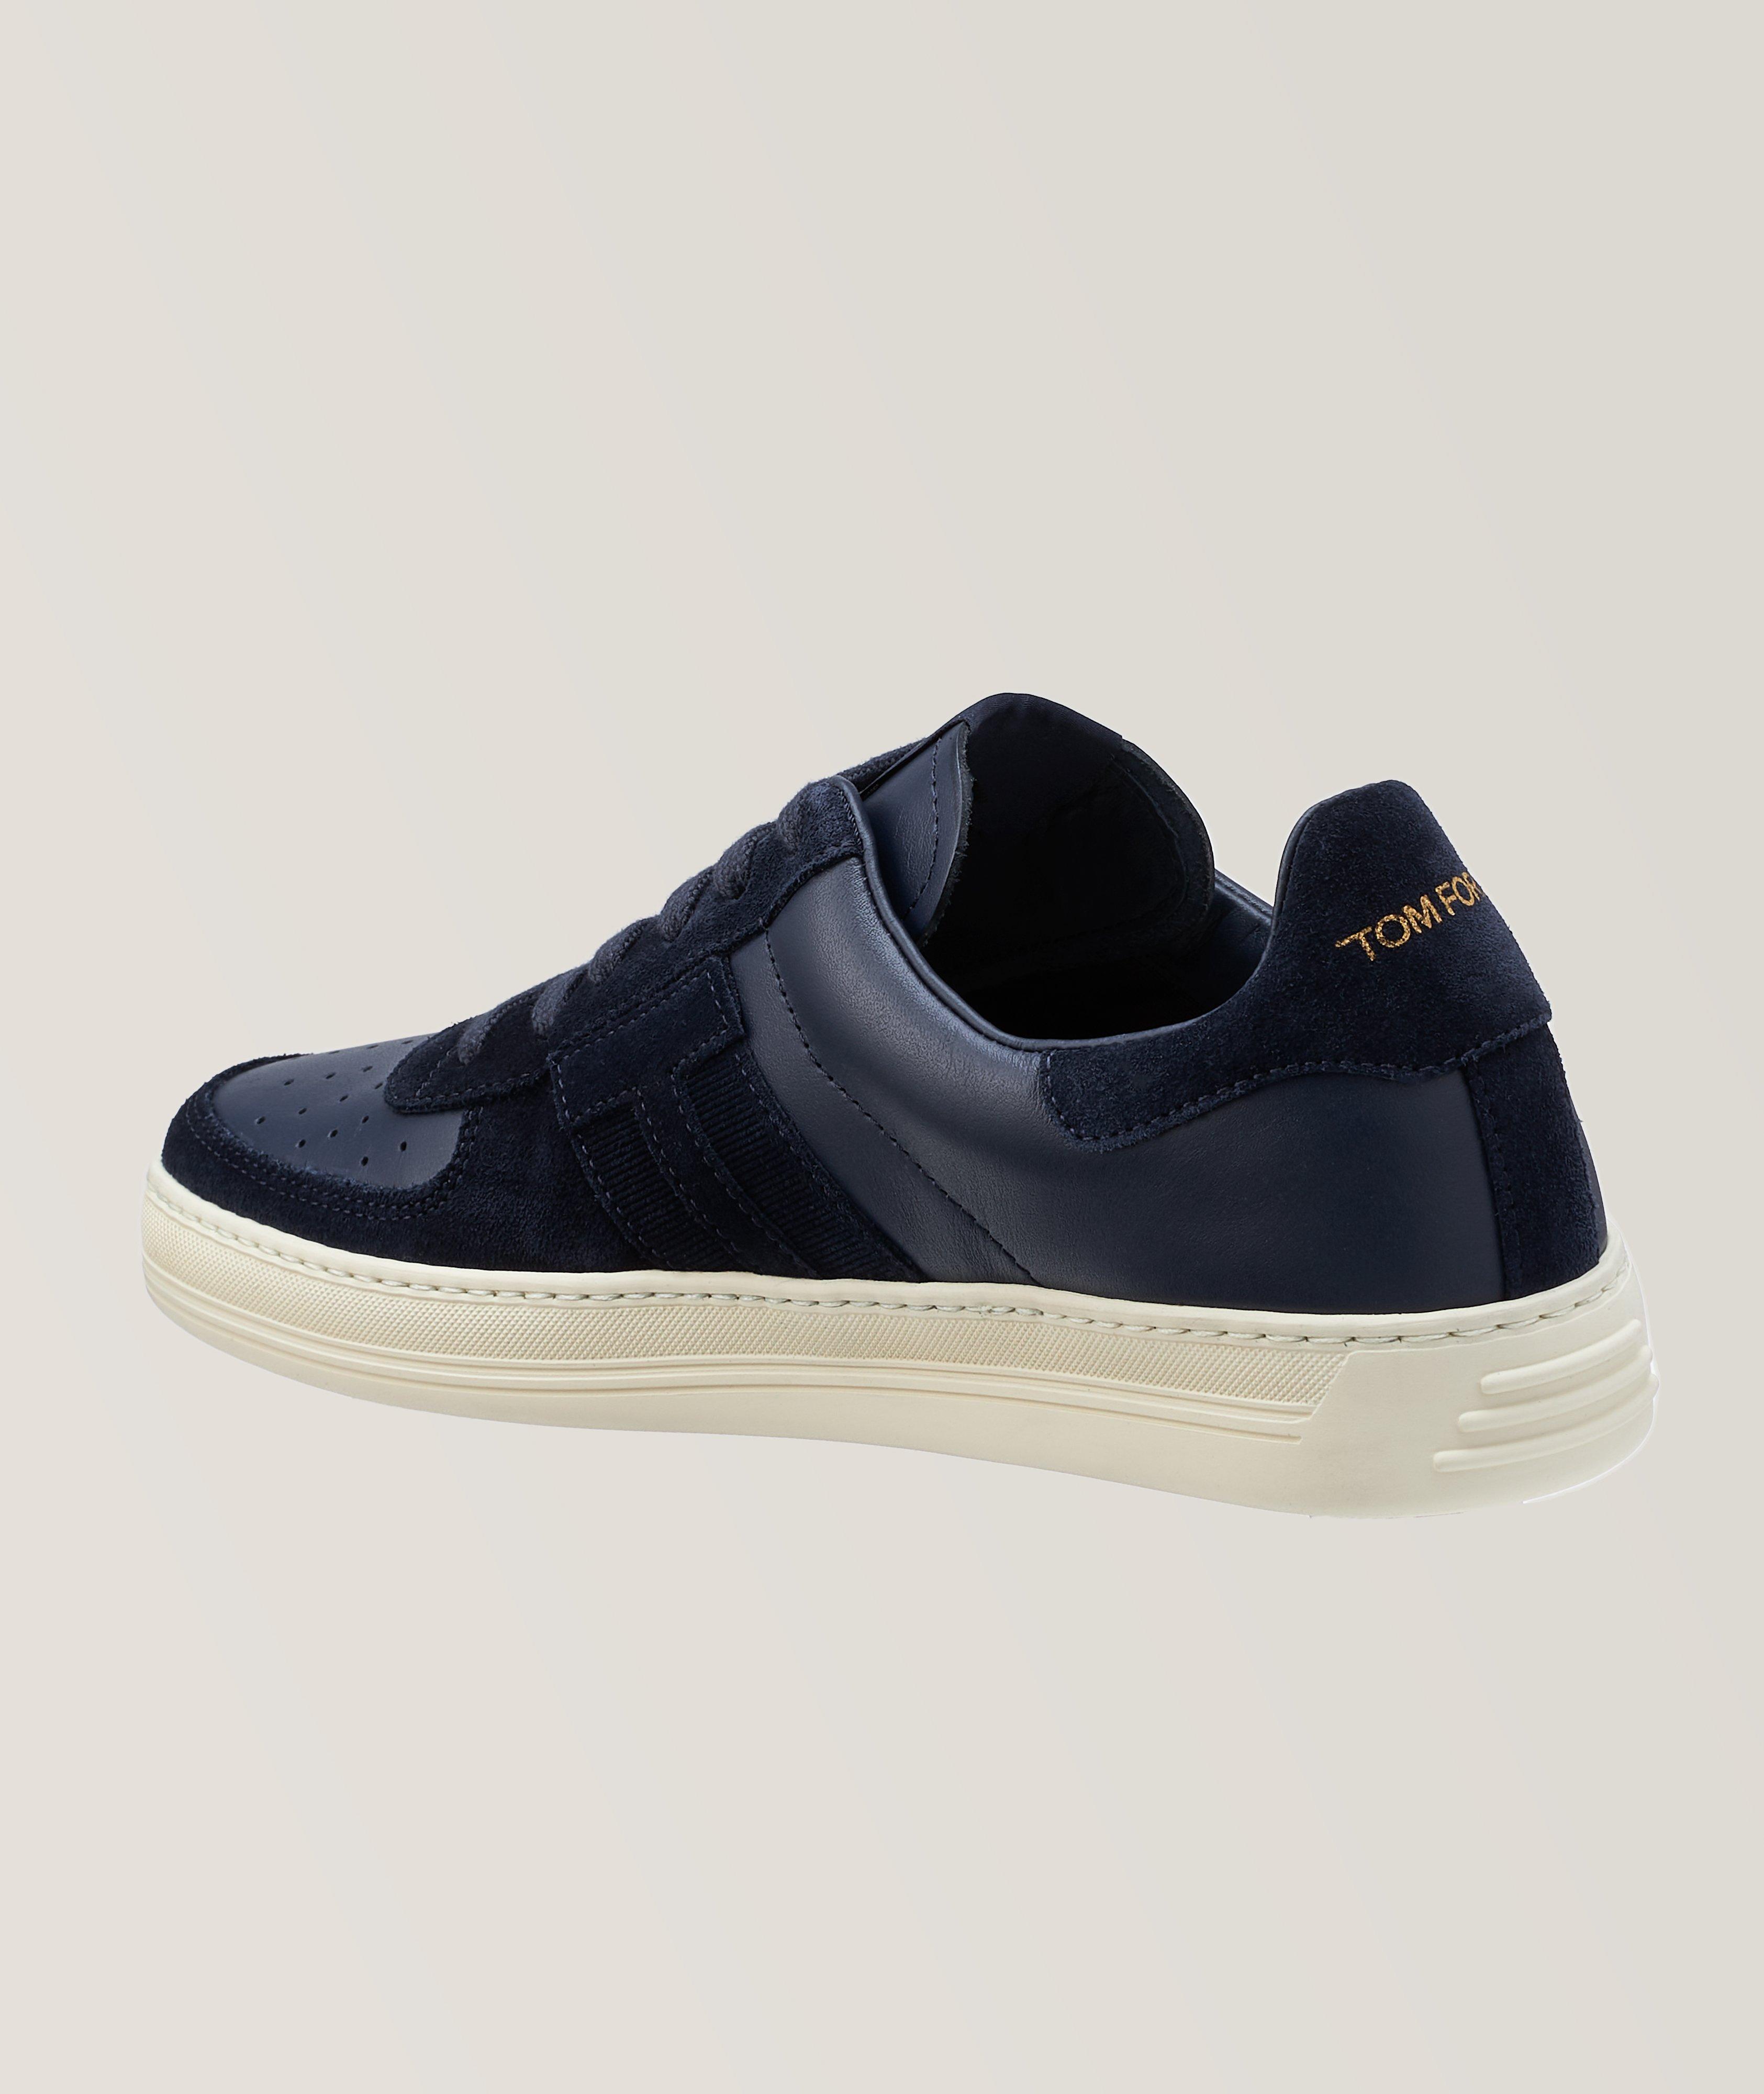 Radcliffe Tonal Suede Leather Sneakers  image 1